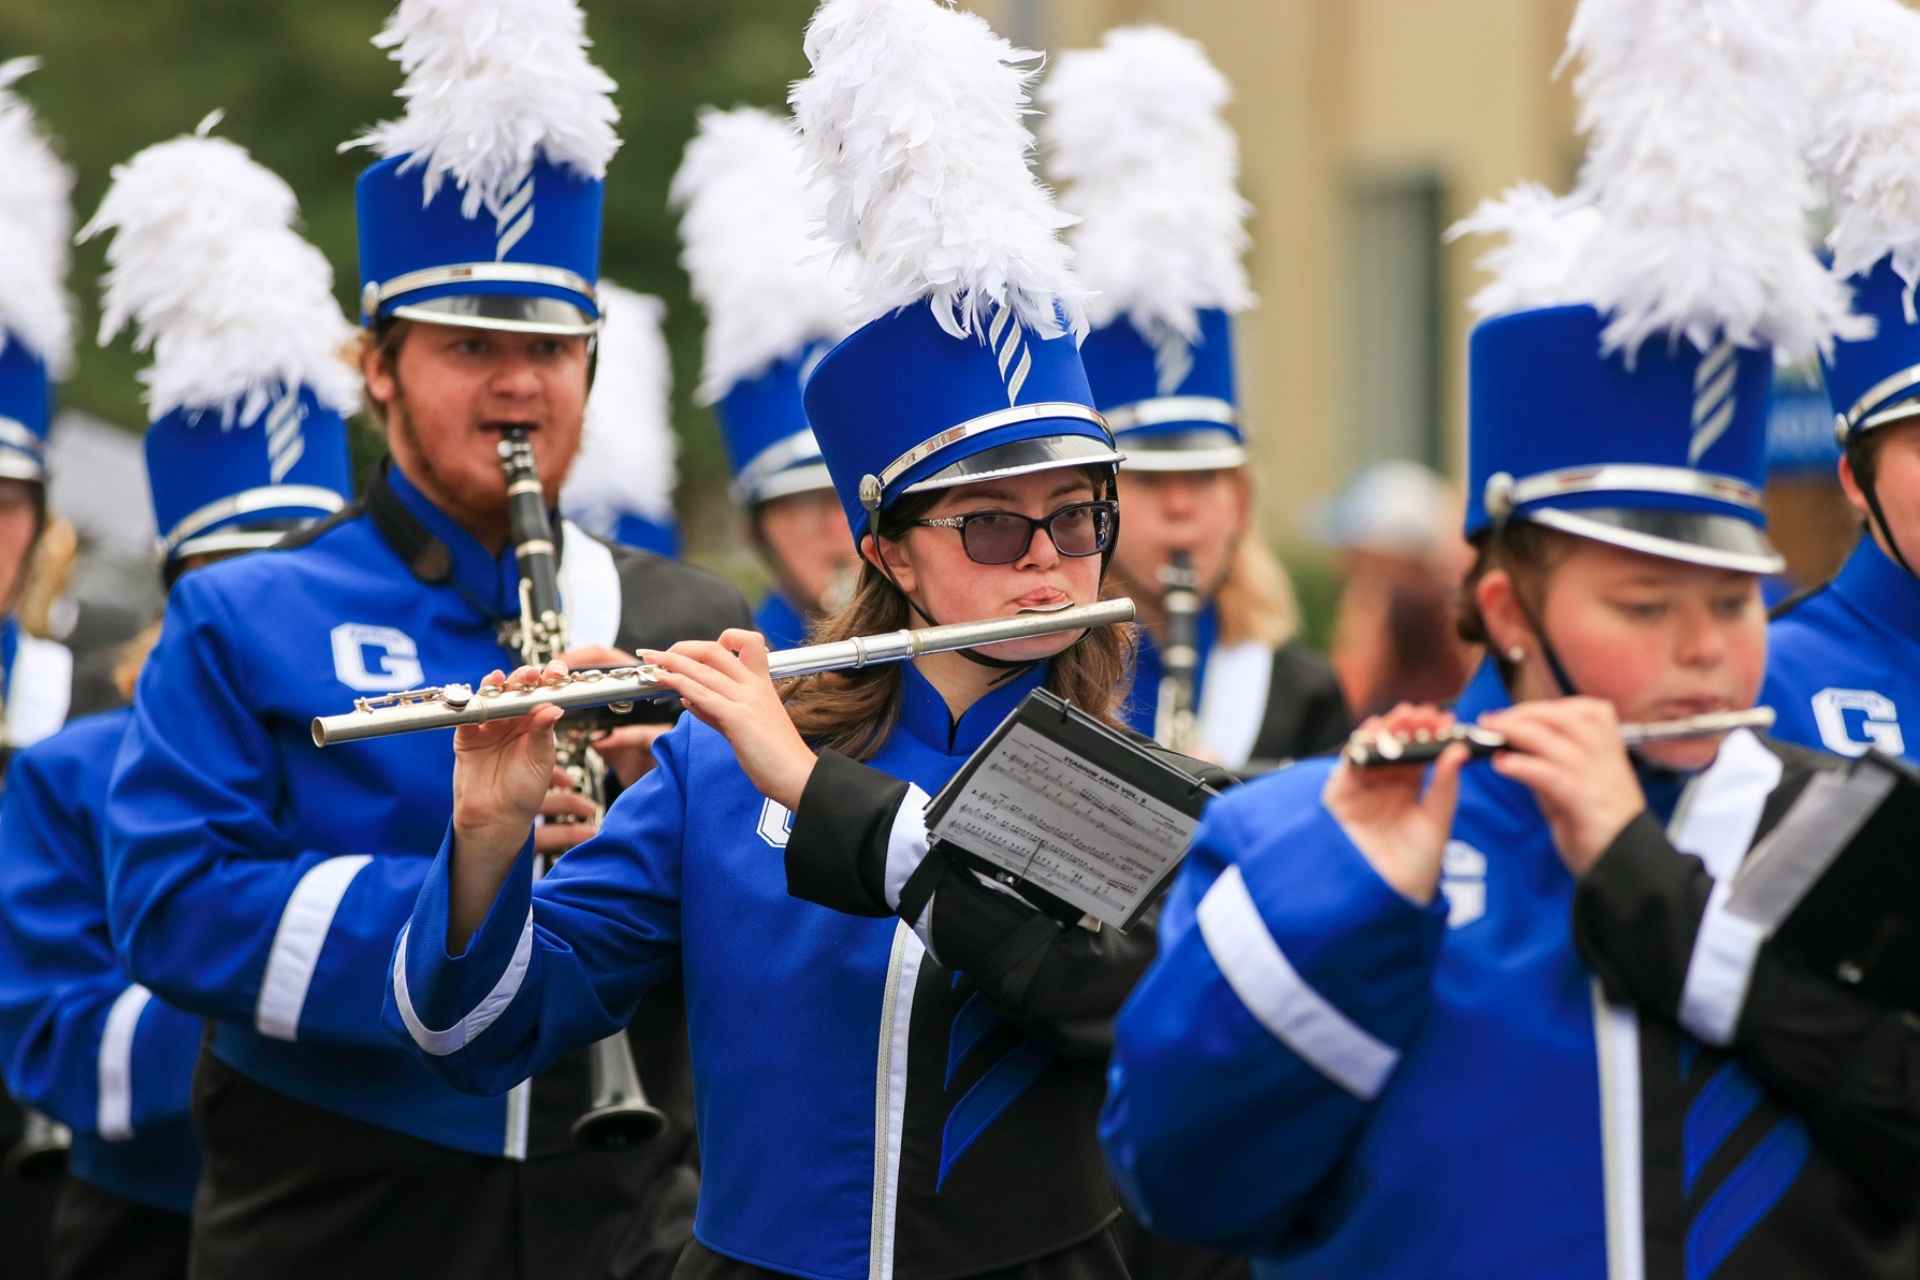 Members of the Glenville State College Marching Band at the College’s 2021 Homecoming Parade.